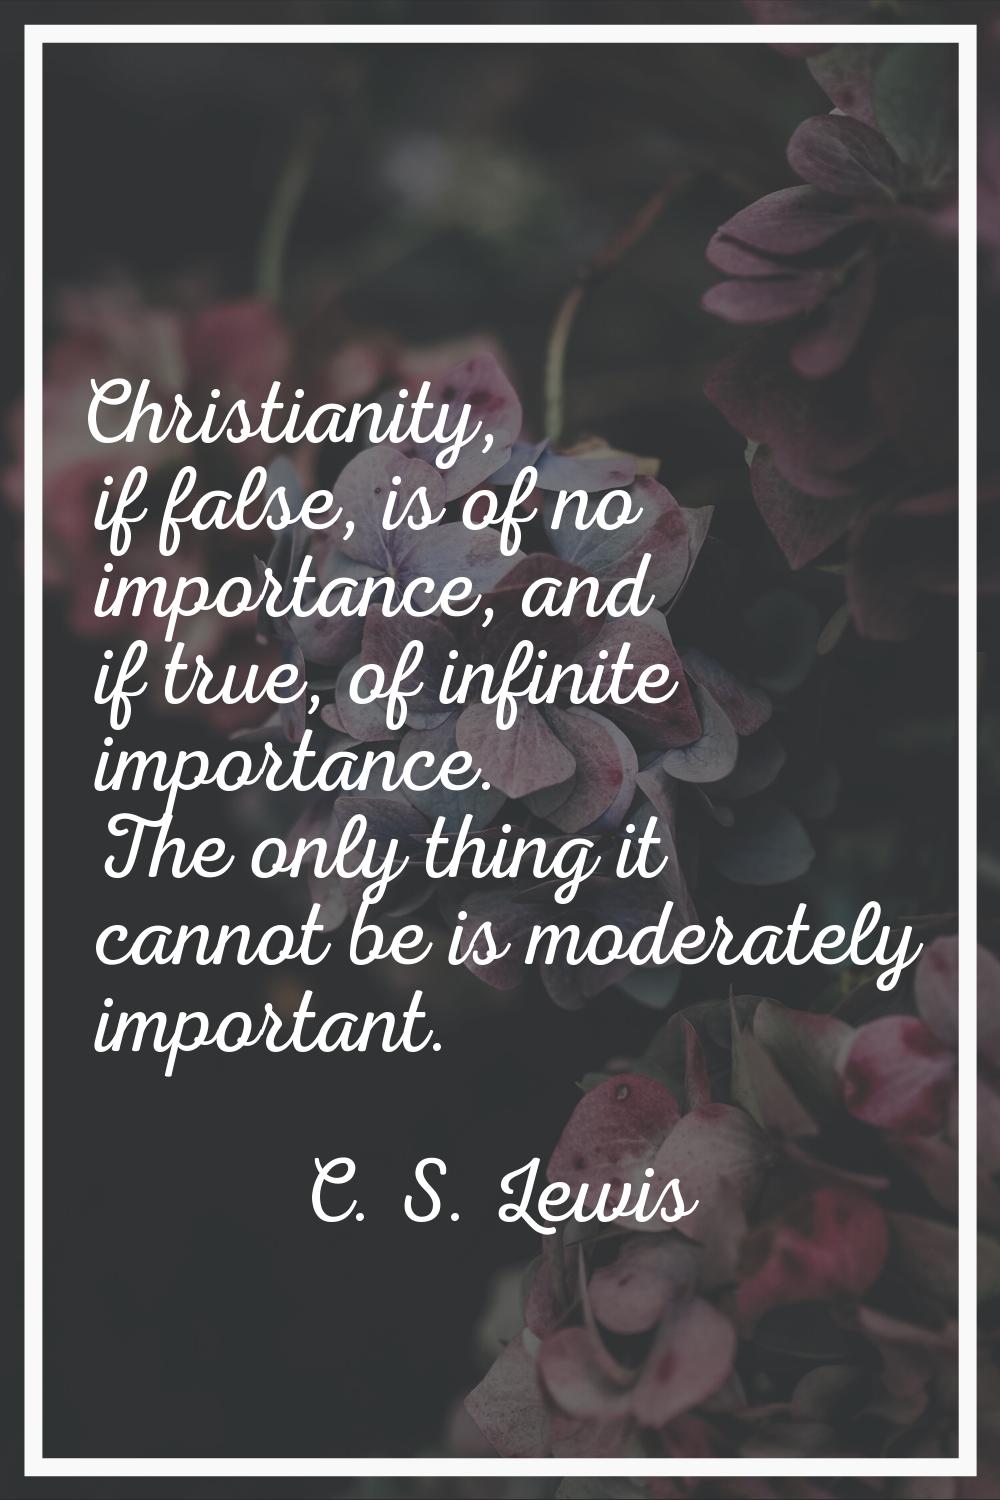 Christianity, if false, is of no importance, and if true, of infinite importance. The only thing it